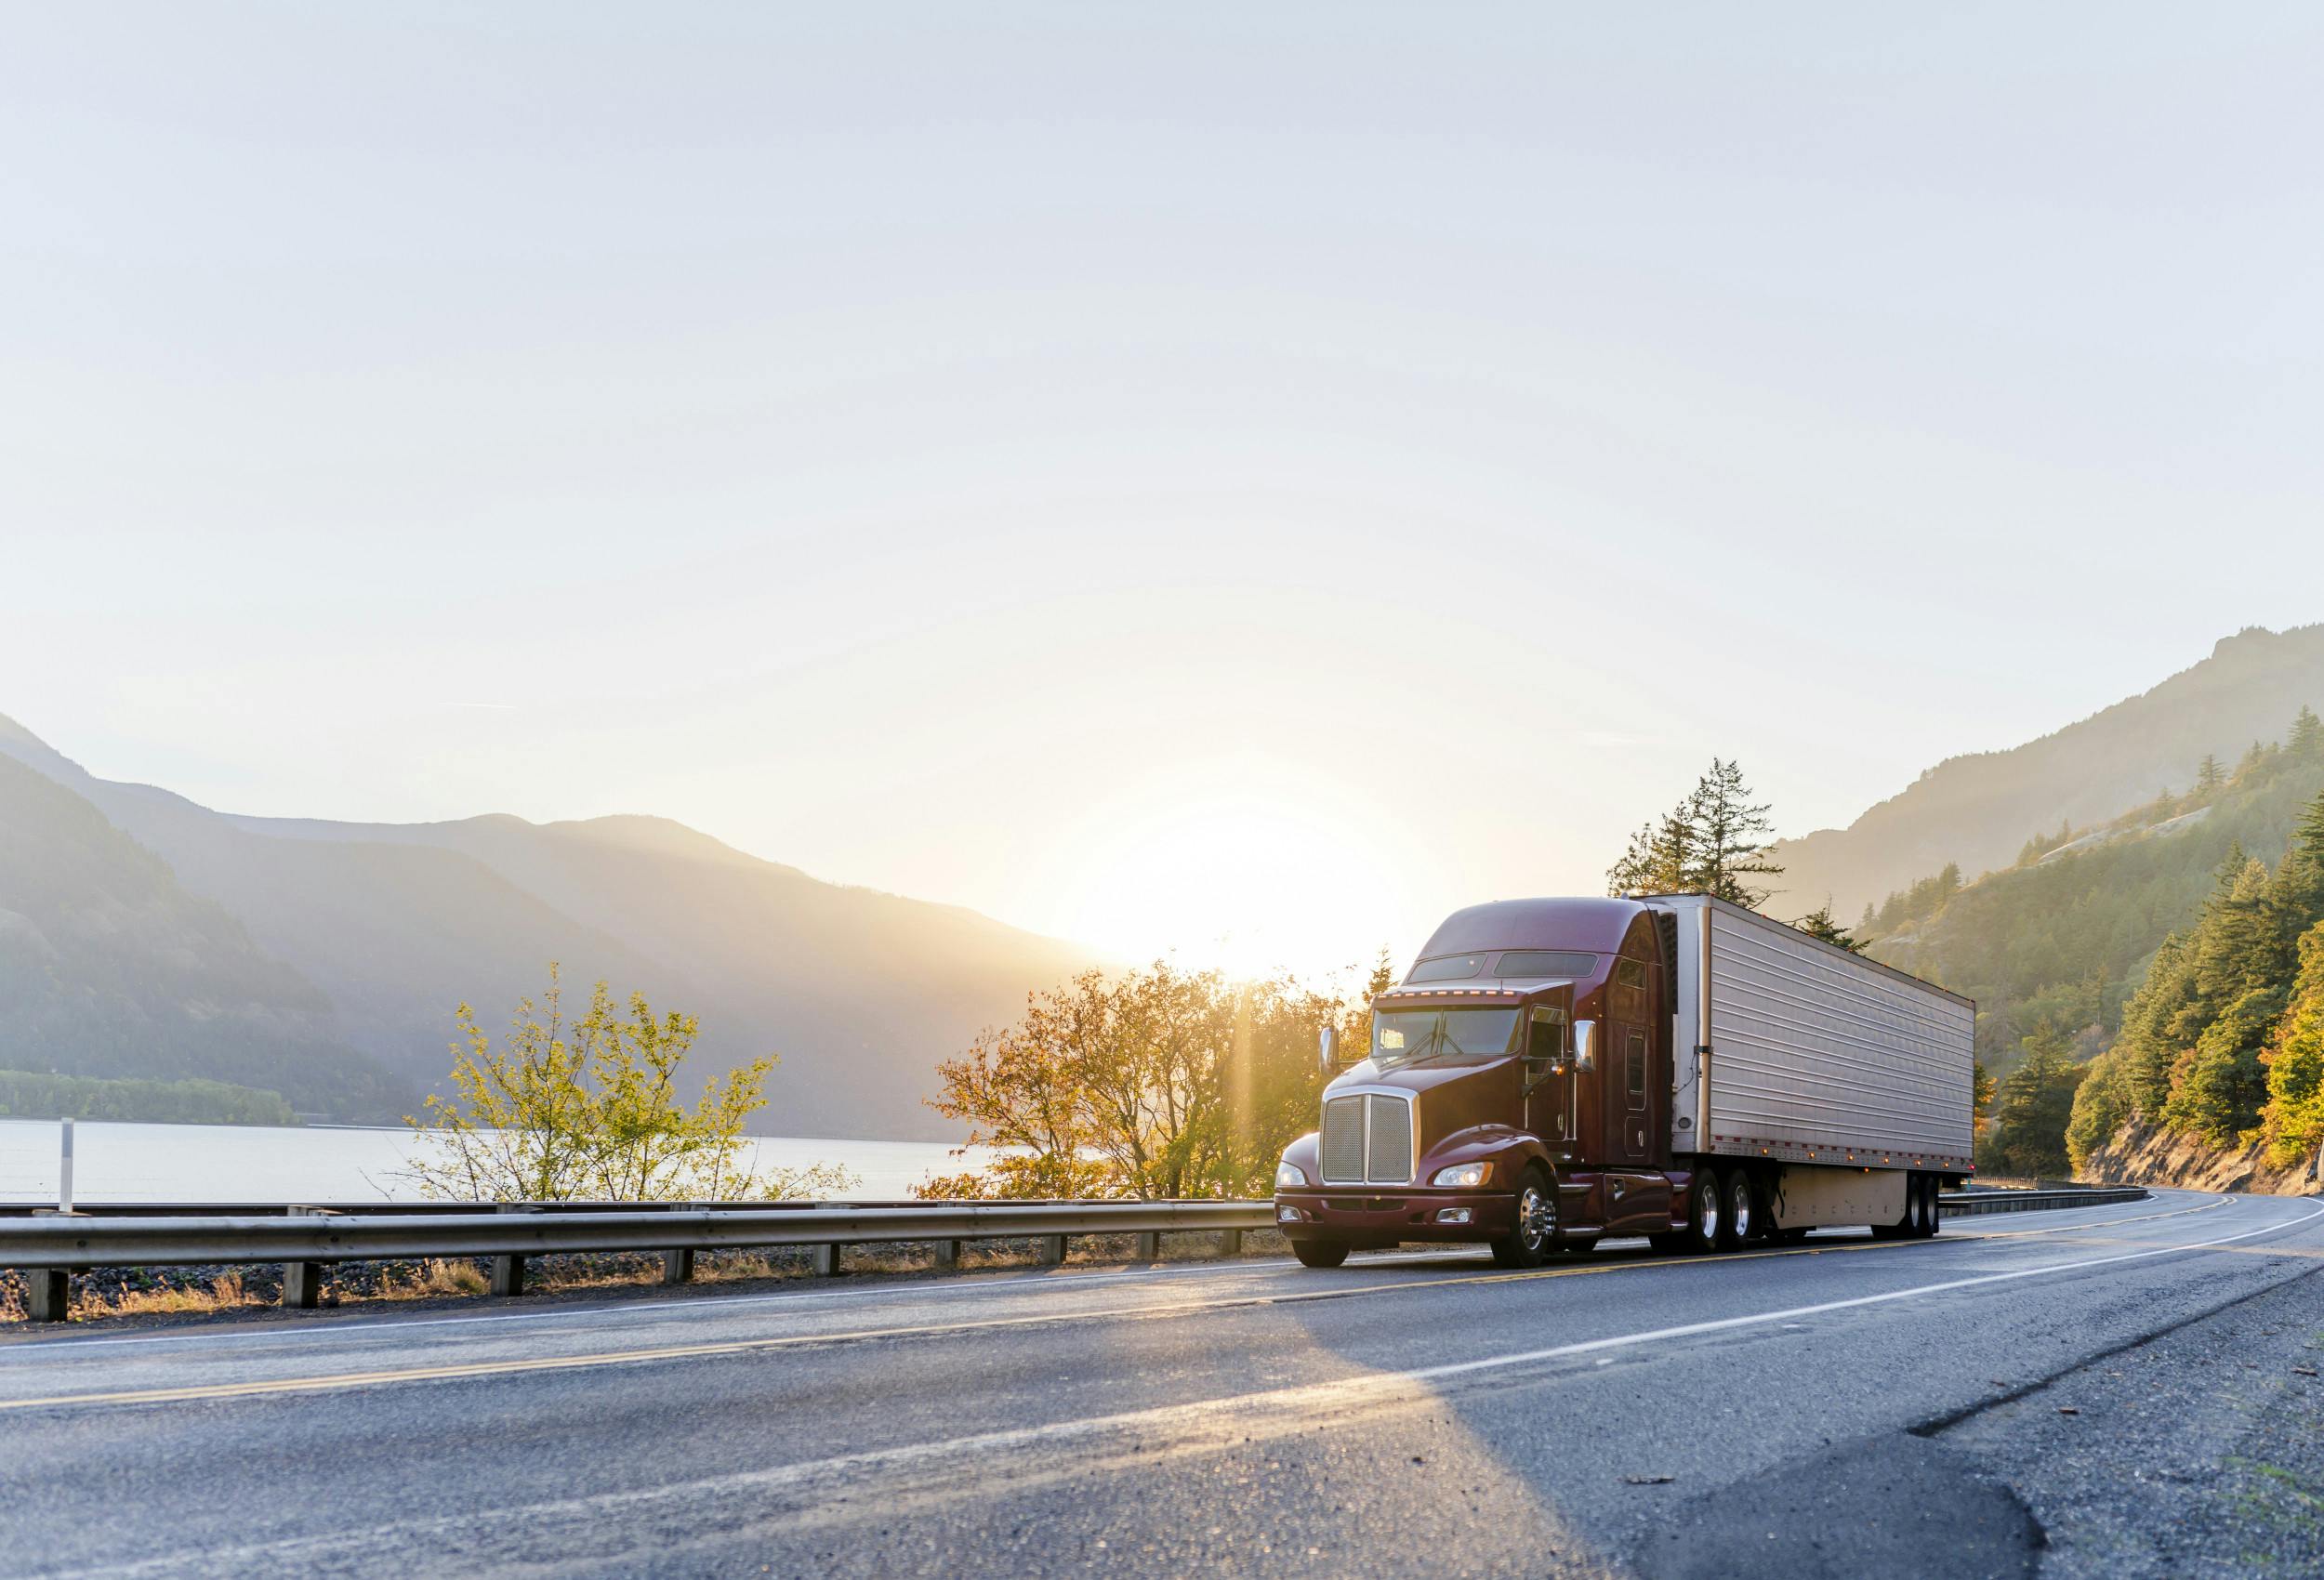 Why You Should Care About the Future of Freight